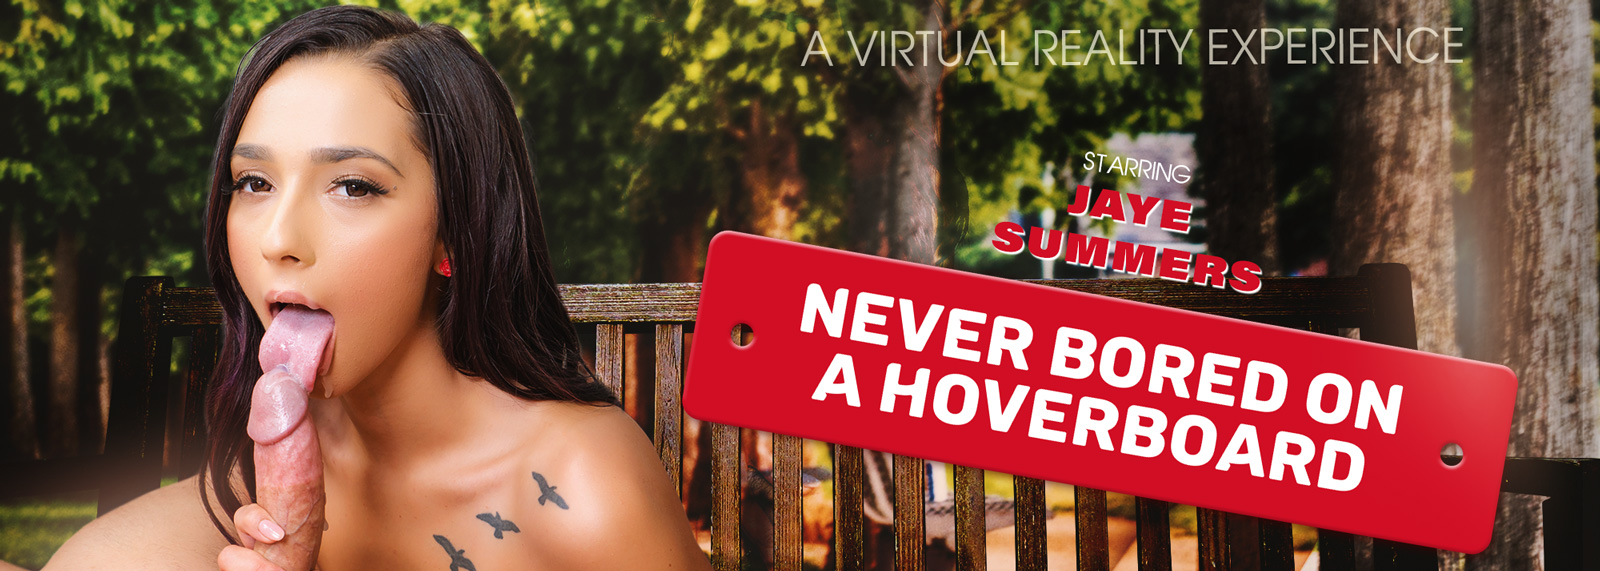 Never Bored on a Hoverboard - VR Porn Video, Starring: Jaye Summers